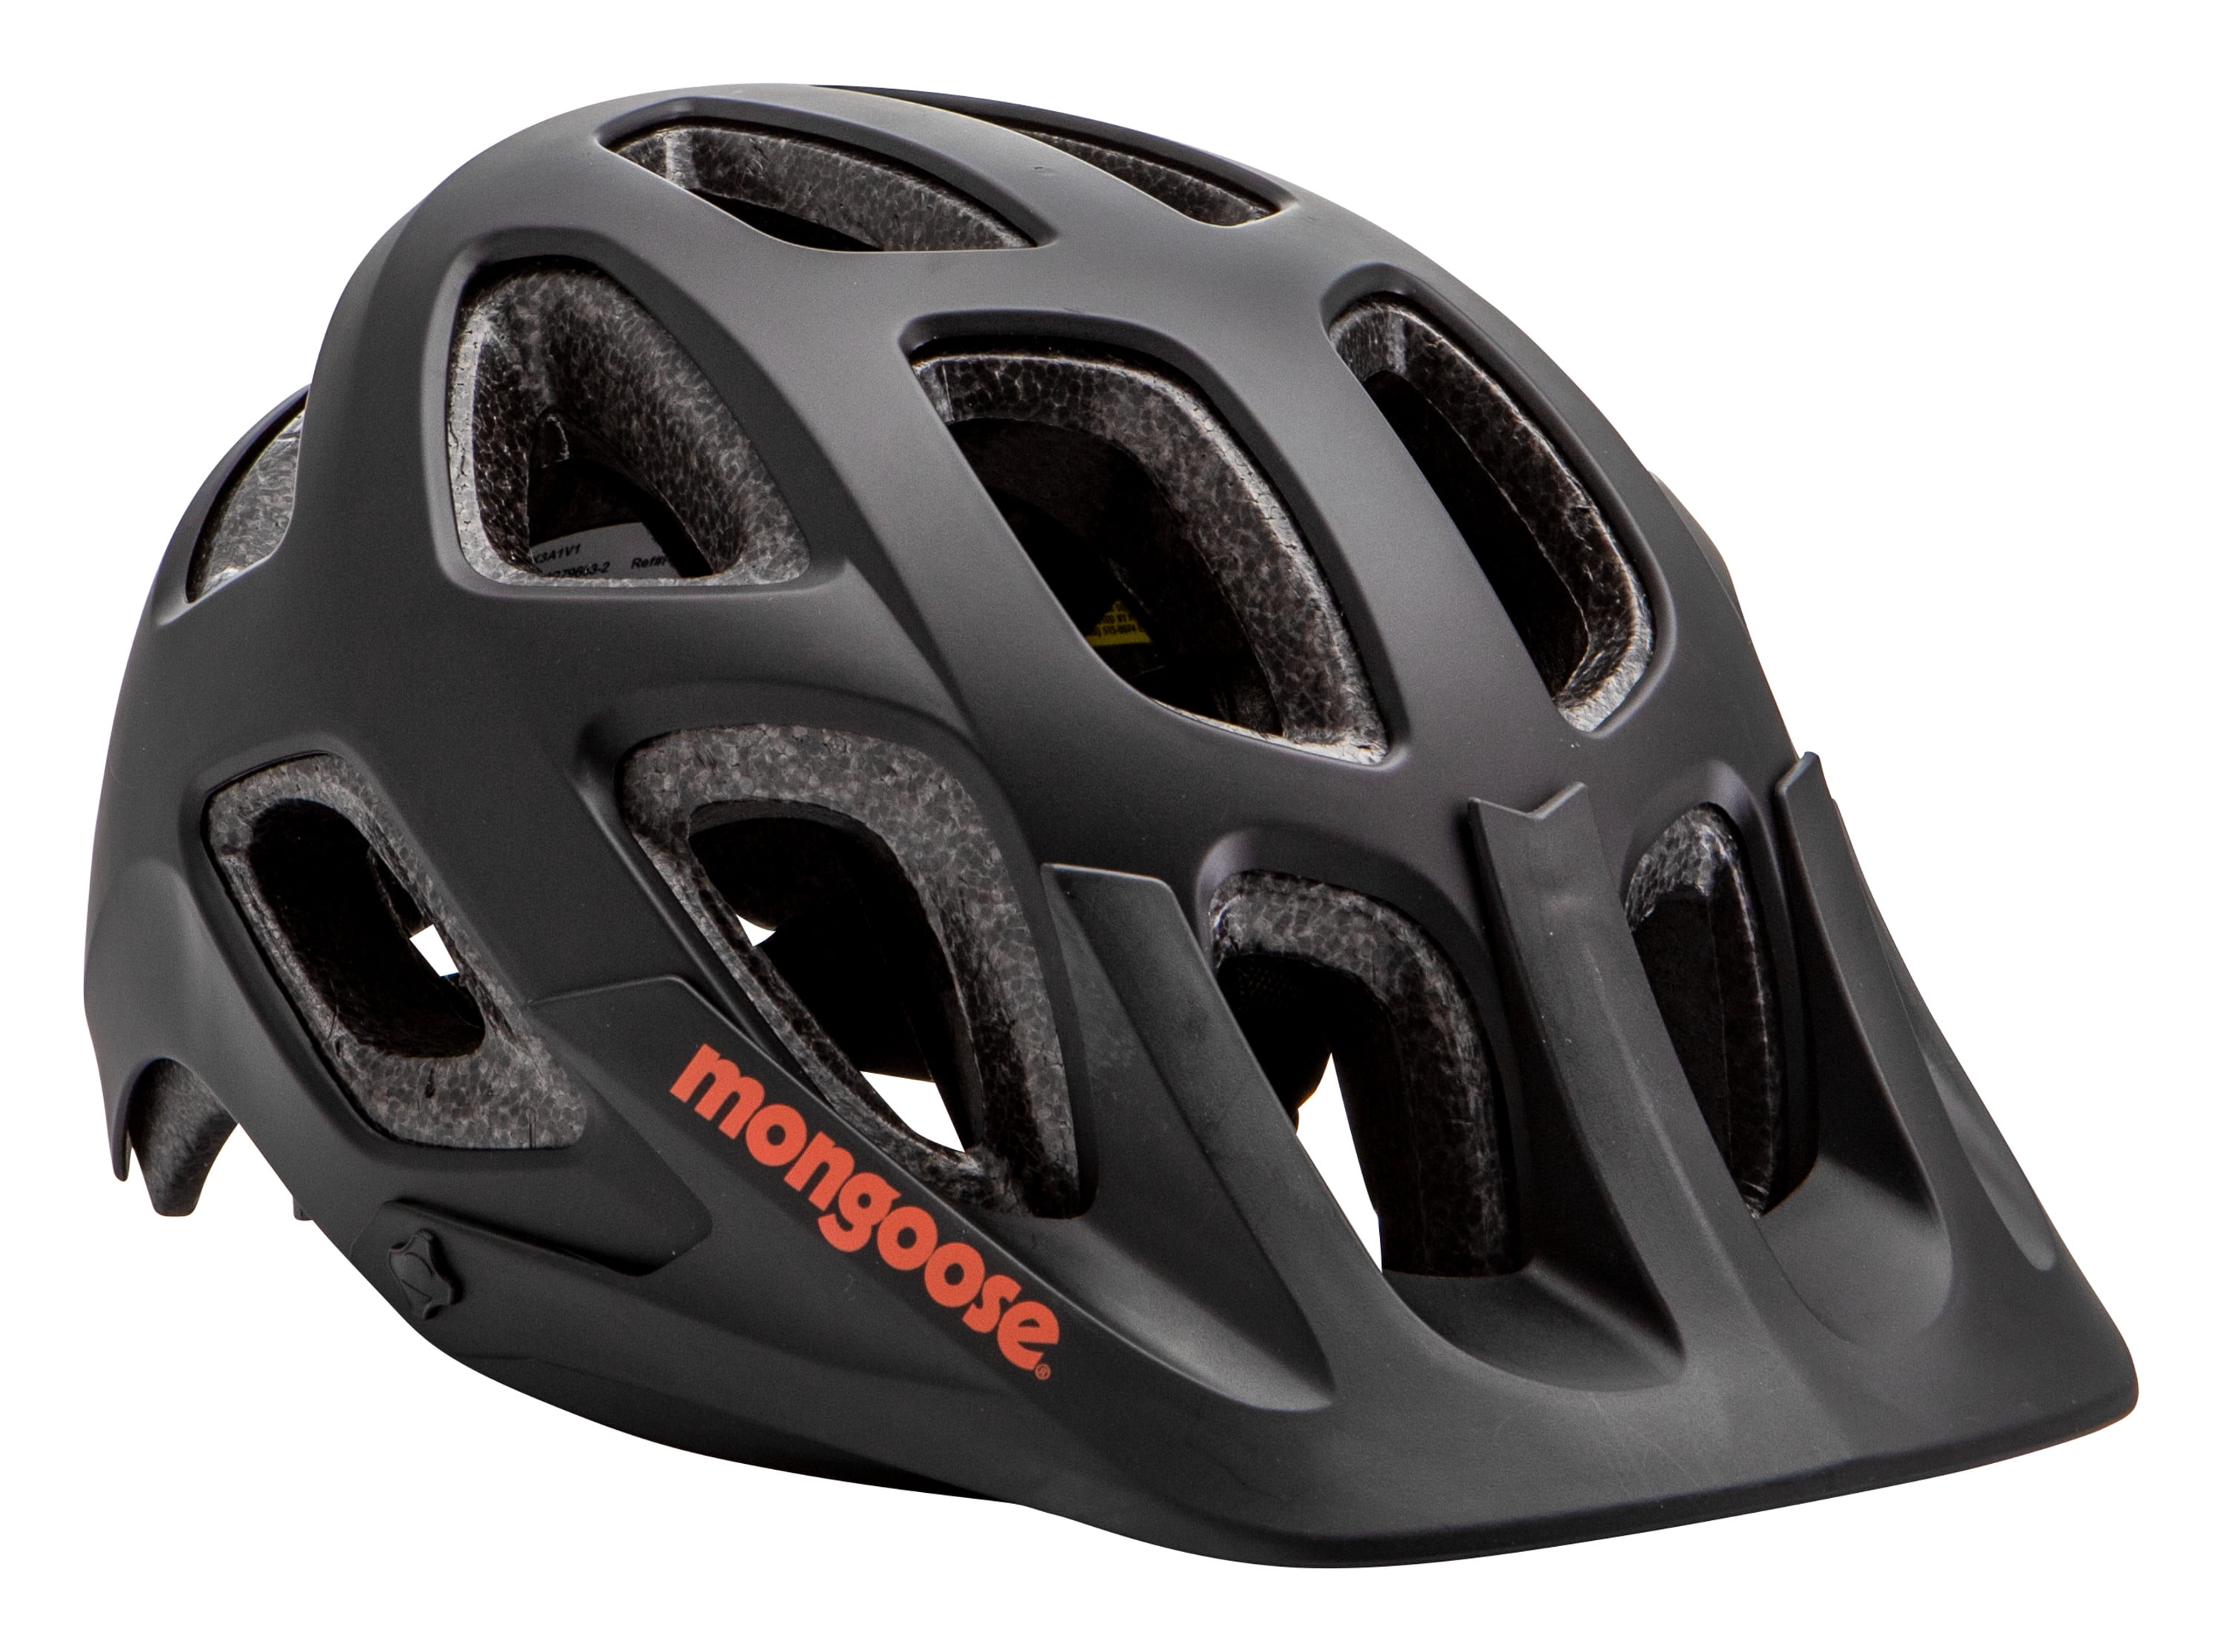 Mongoose Session Adult Bicycling Helmet 